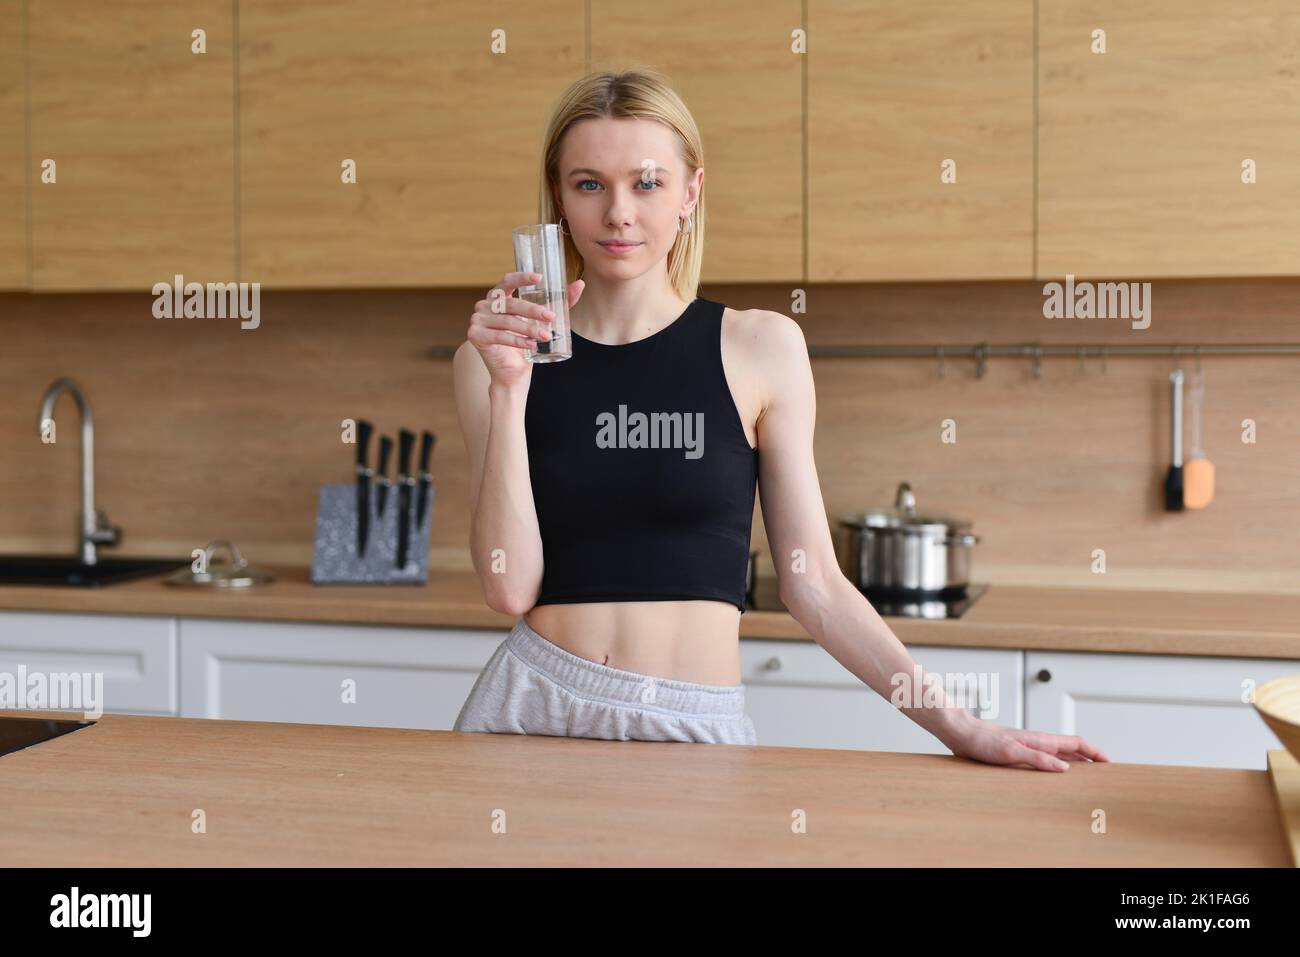 Woman drinking water in kitchen. Stock Photo